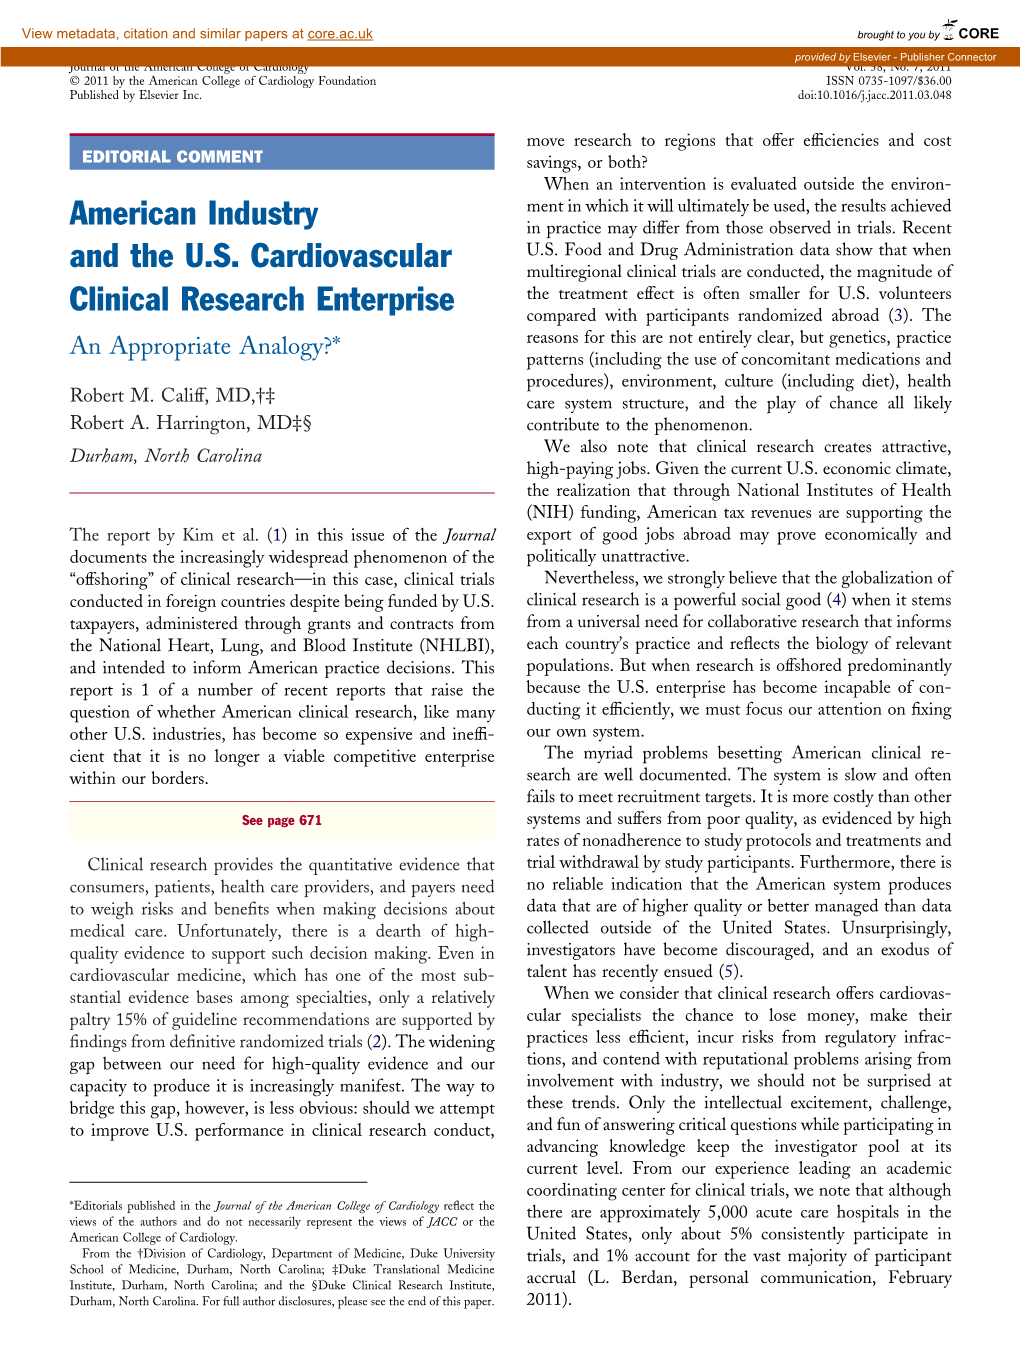 American Industry and the U.S. Cardiovascular Clinical Research Enterprise